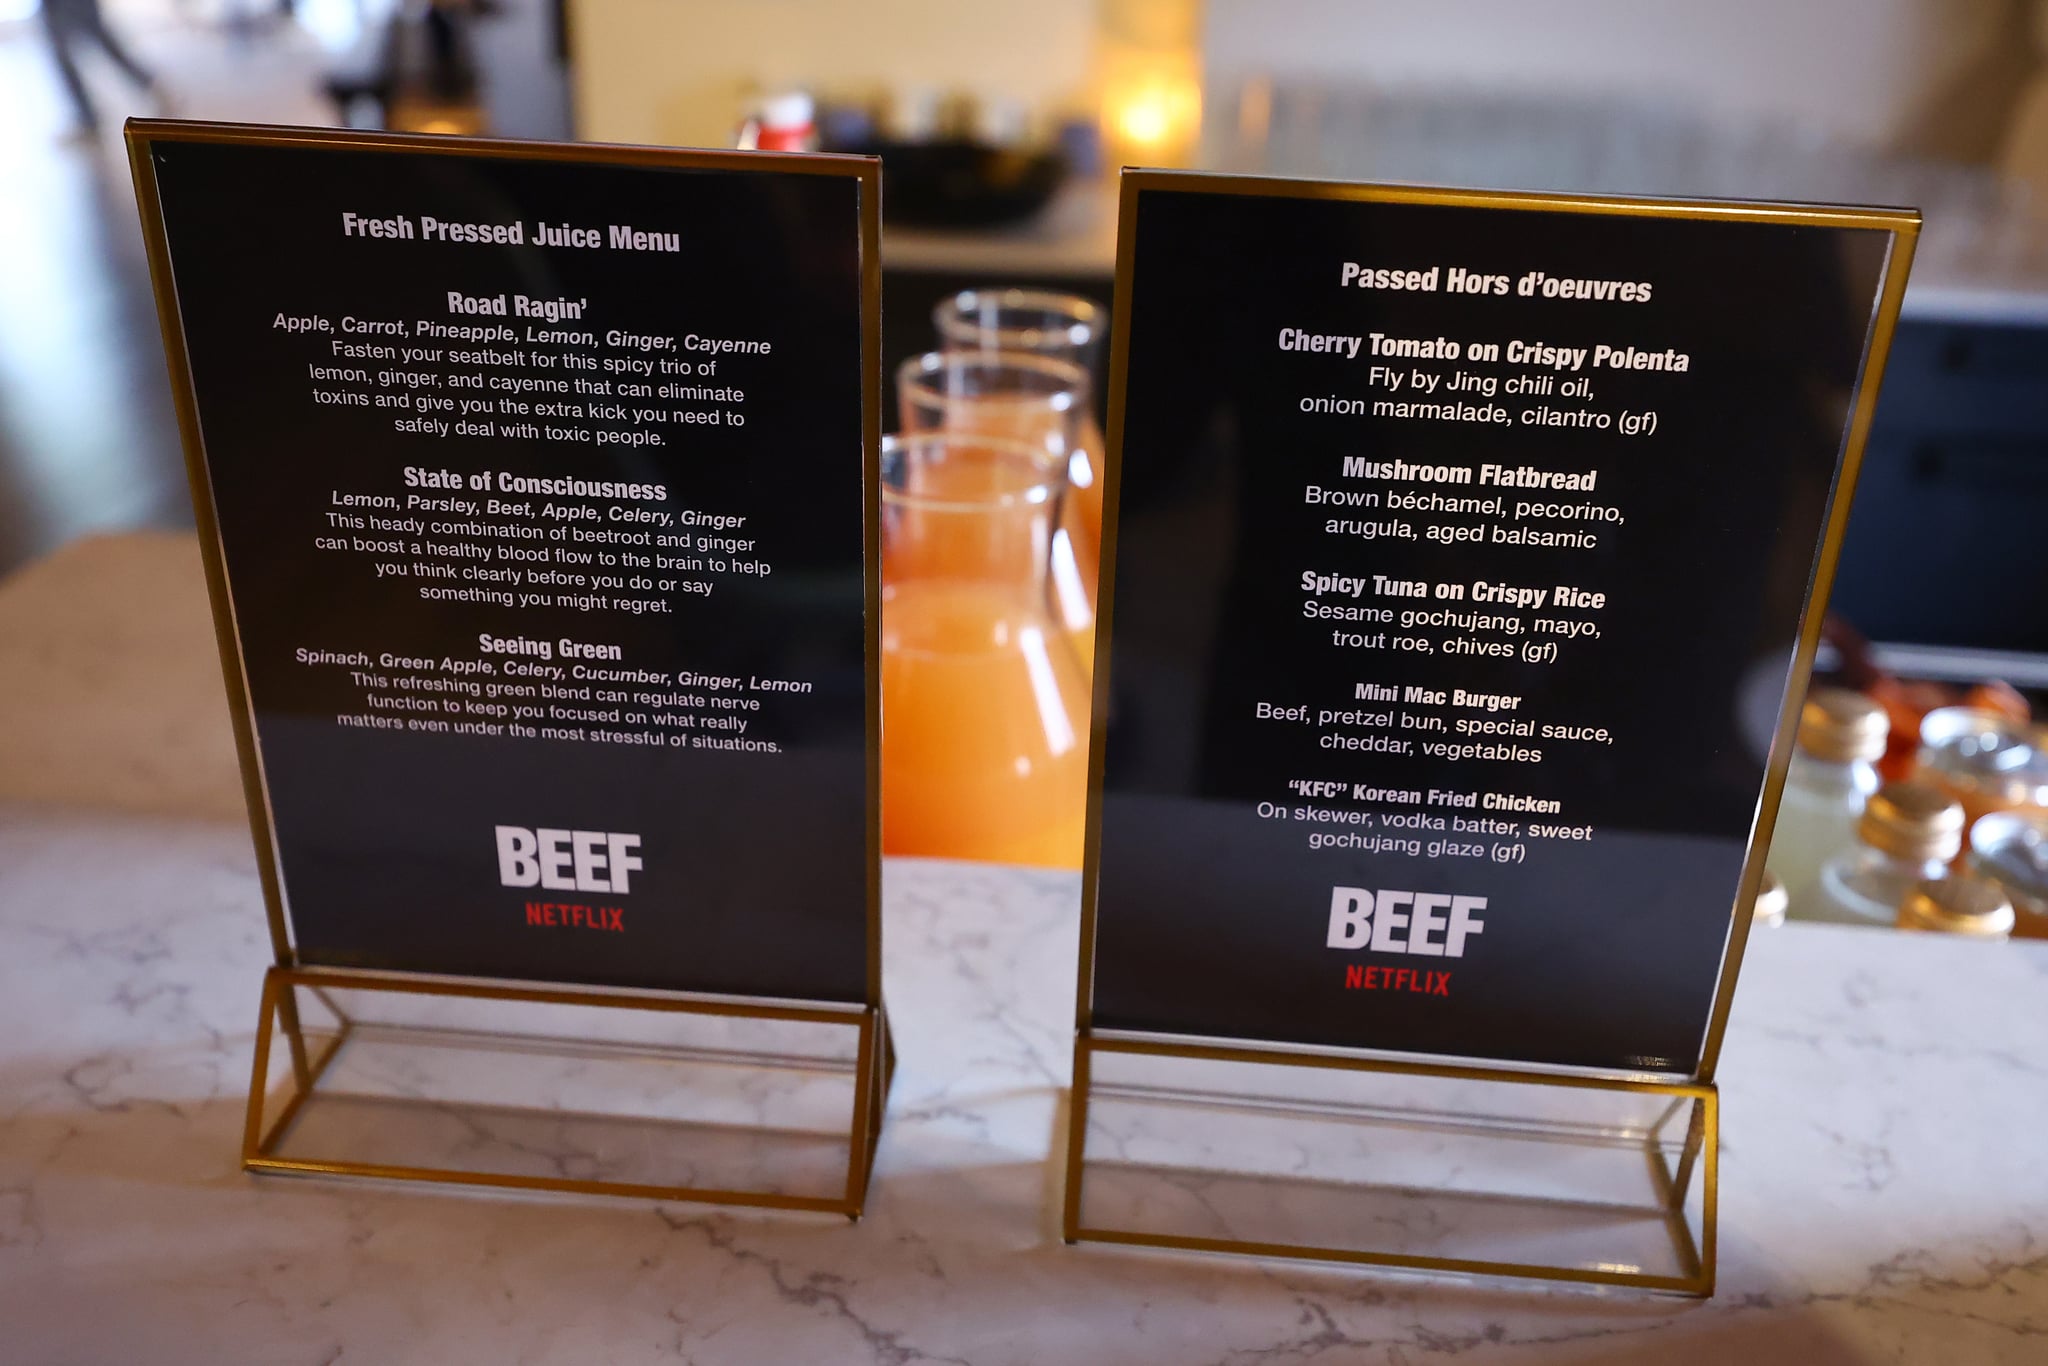 NEW YORK, NEW YORK - APRIL 05: A view of the juice bar and passed hors d'oeuvres menus during Netflix's BEEF 